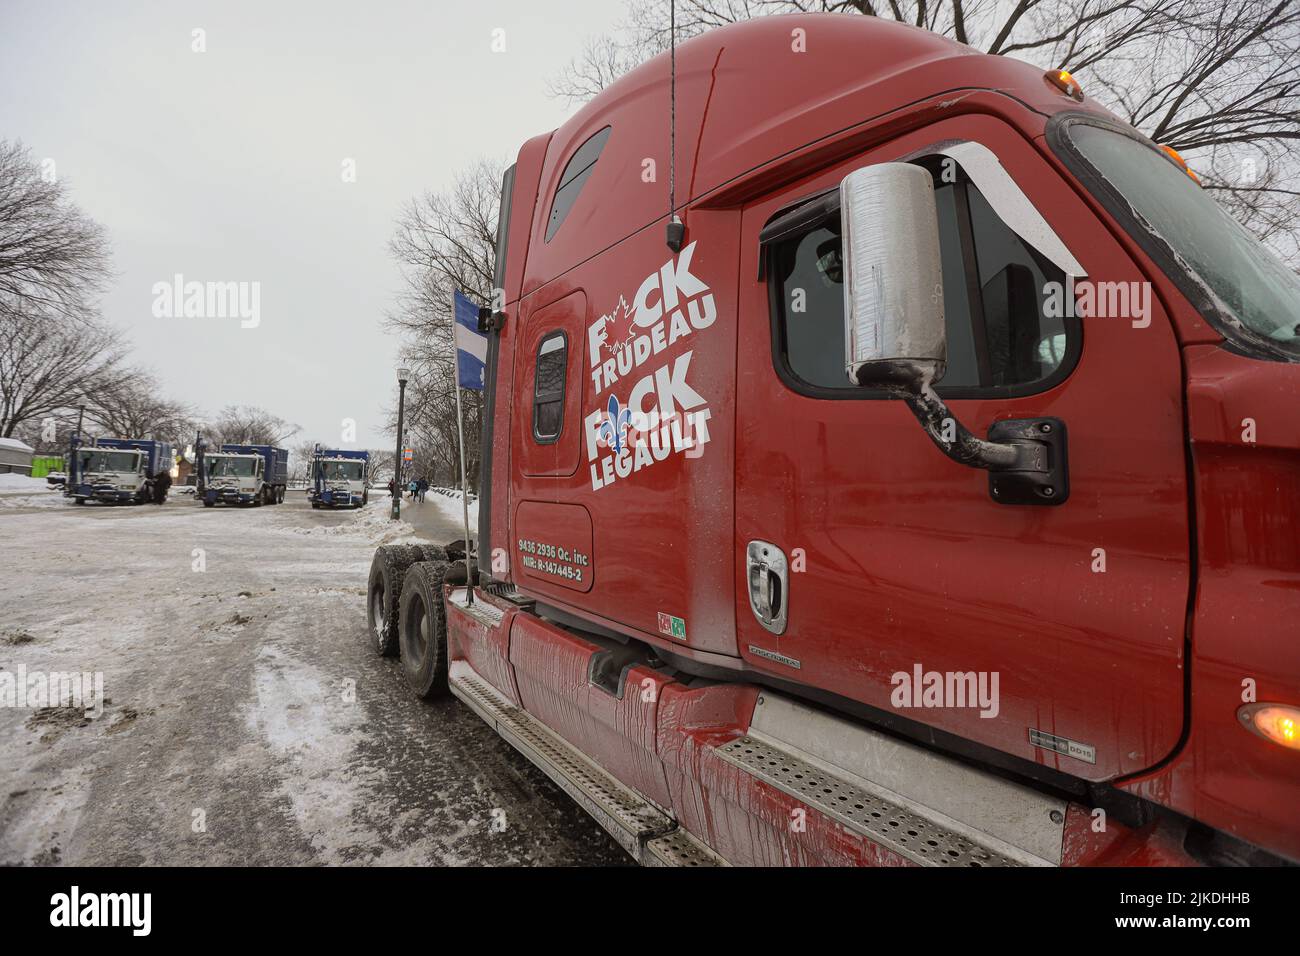 A semi truck is seen during the 'convoie de la liberte' (freedom convoy) rally in Quebec City Friday February 4, 2022. Stock Photo